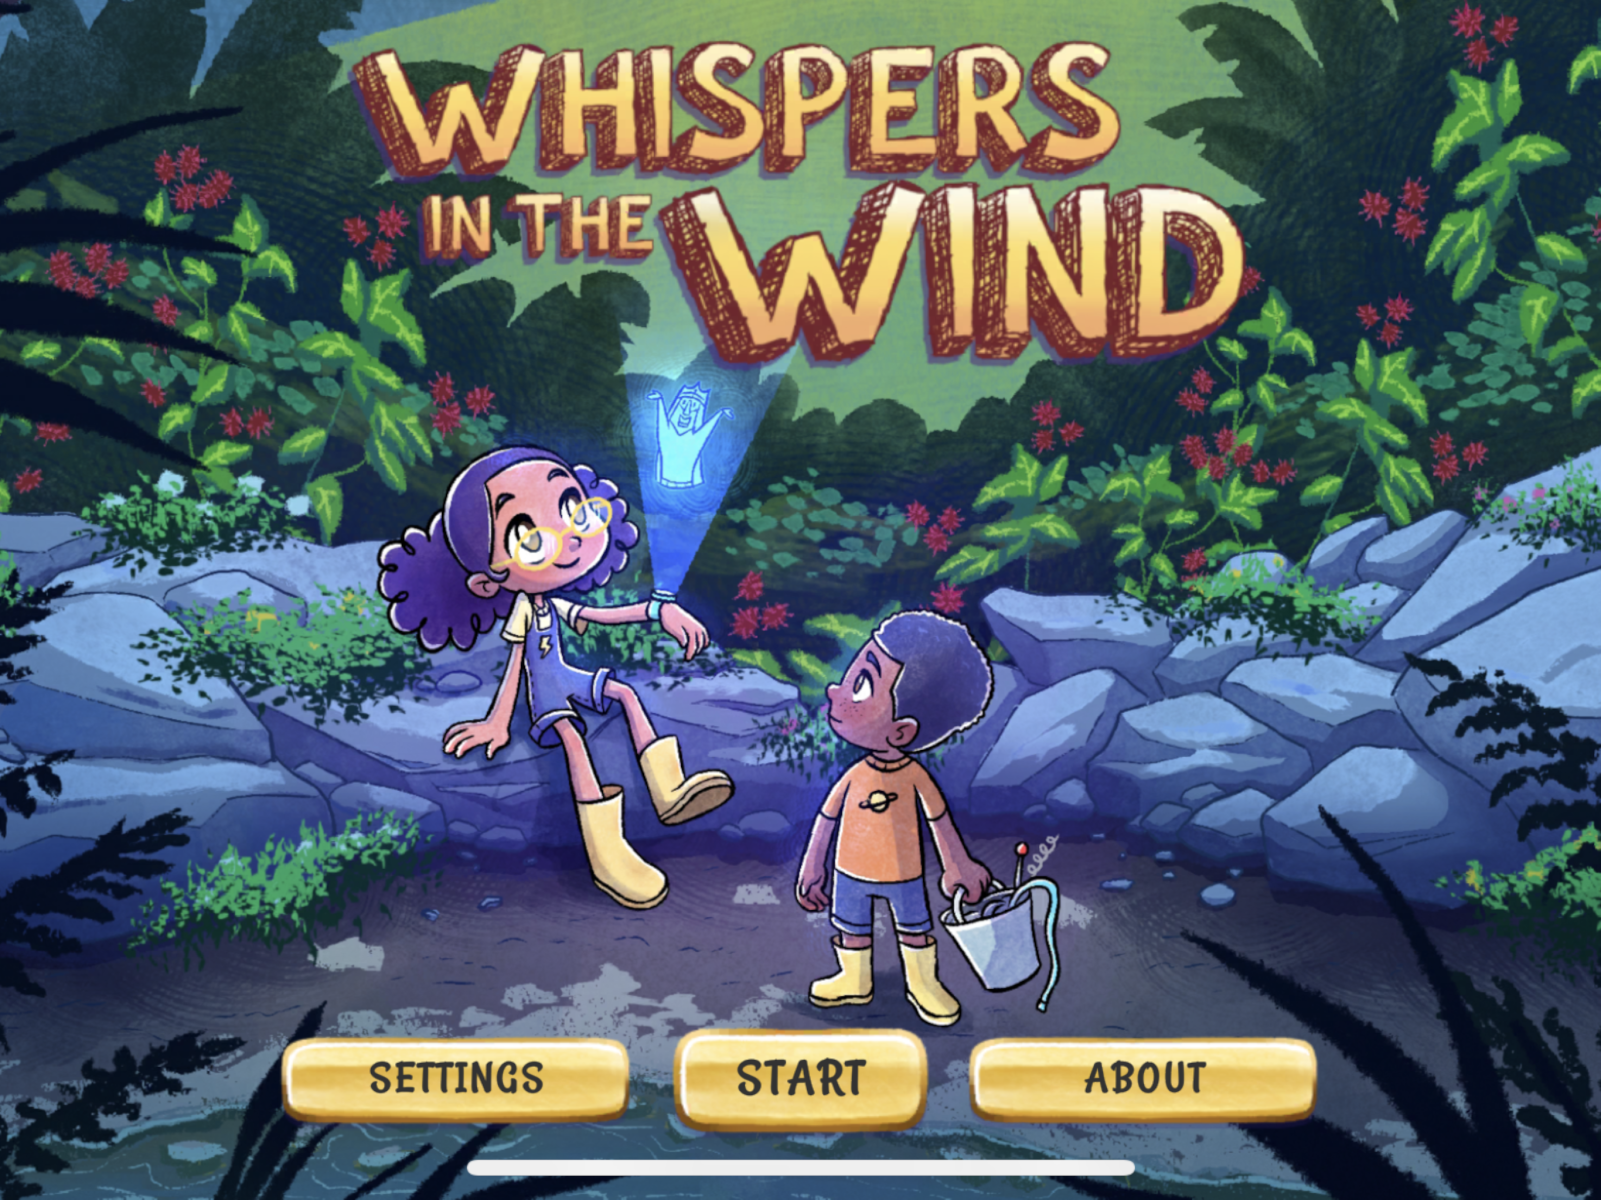 In this splash screen for the game, two animated kids sit in a forest looking at a floating hologram